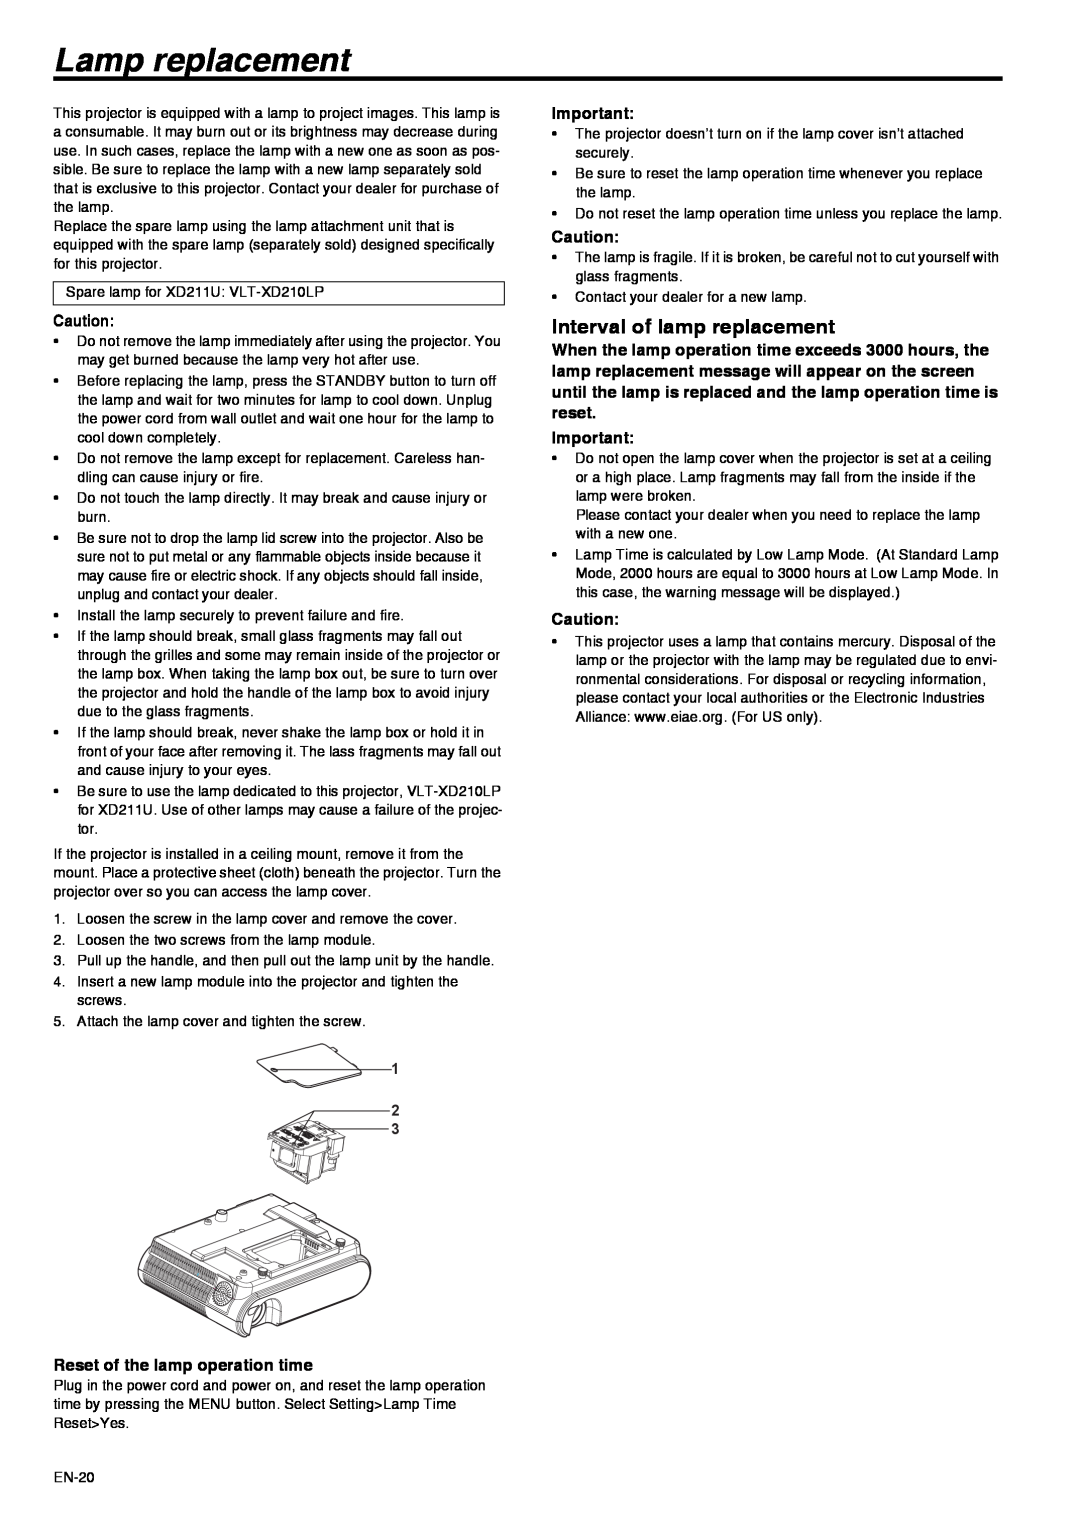 Mitsubishi Electronics XD211U user manual Lamp replacement, Interval of lamp replacement, Reset of the lamp operation time 